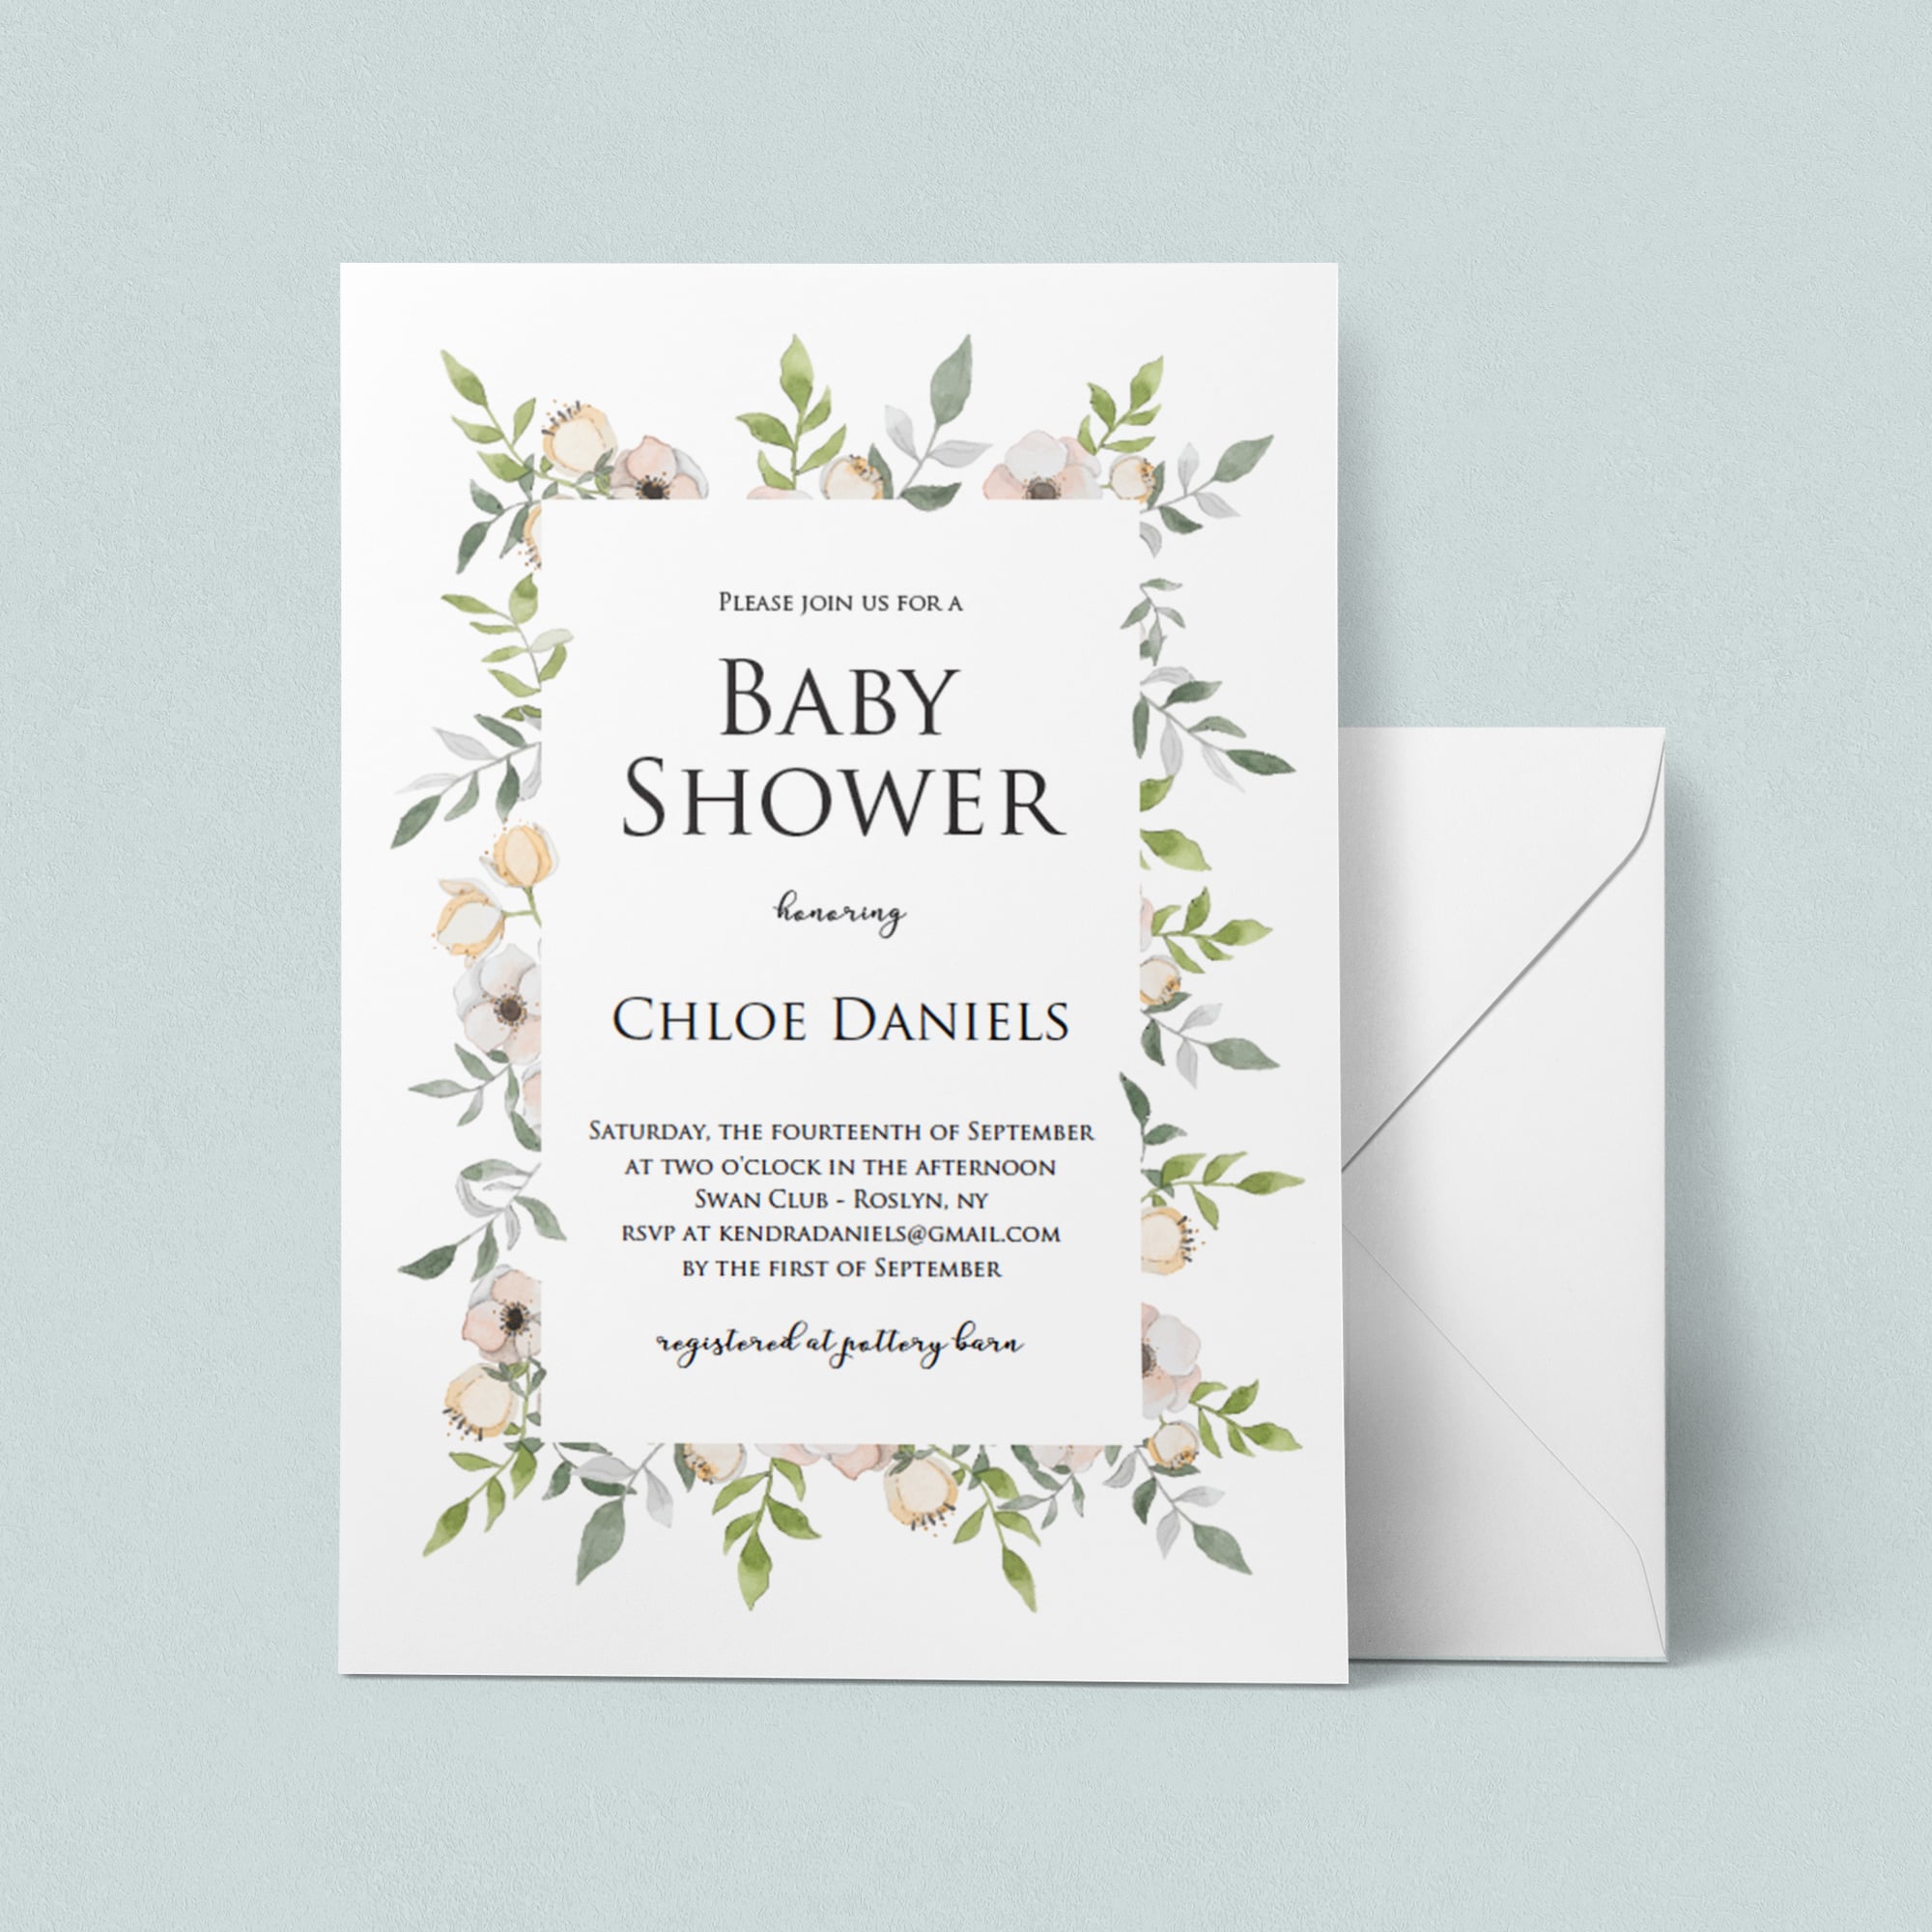 DIY floral frame baby shower invitation template by LittleSizzle